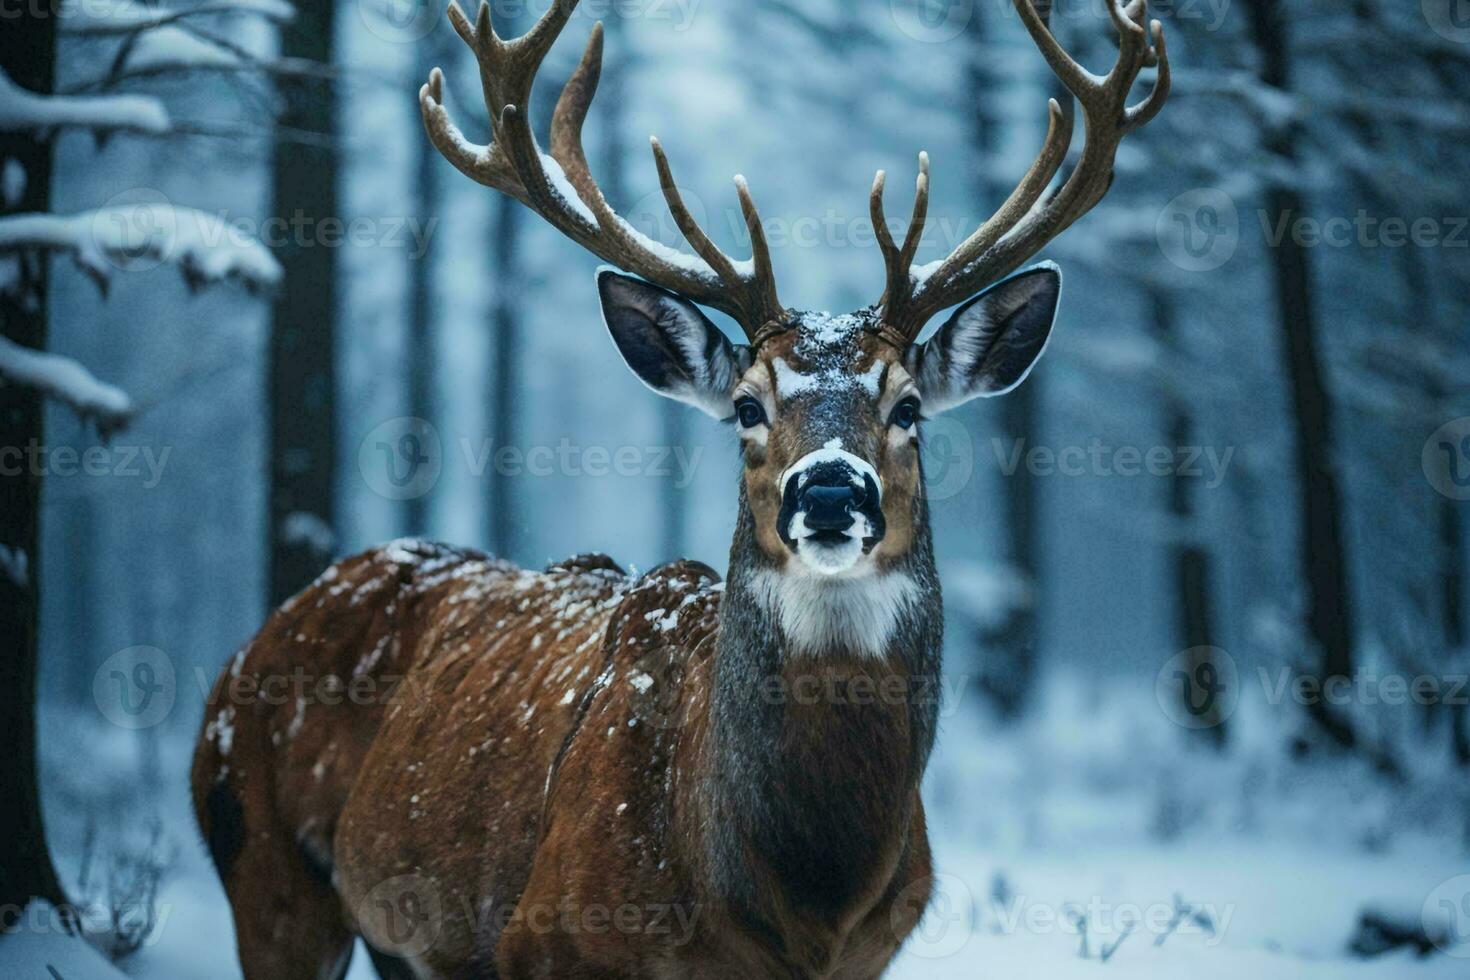 a cute deer stands gracefully and looks directly at the camera photo